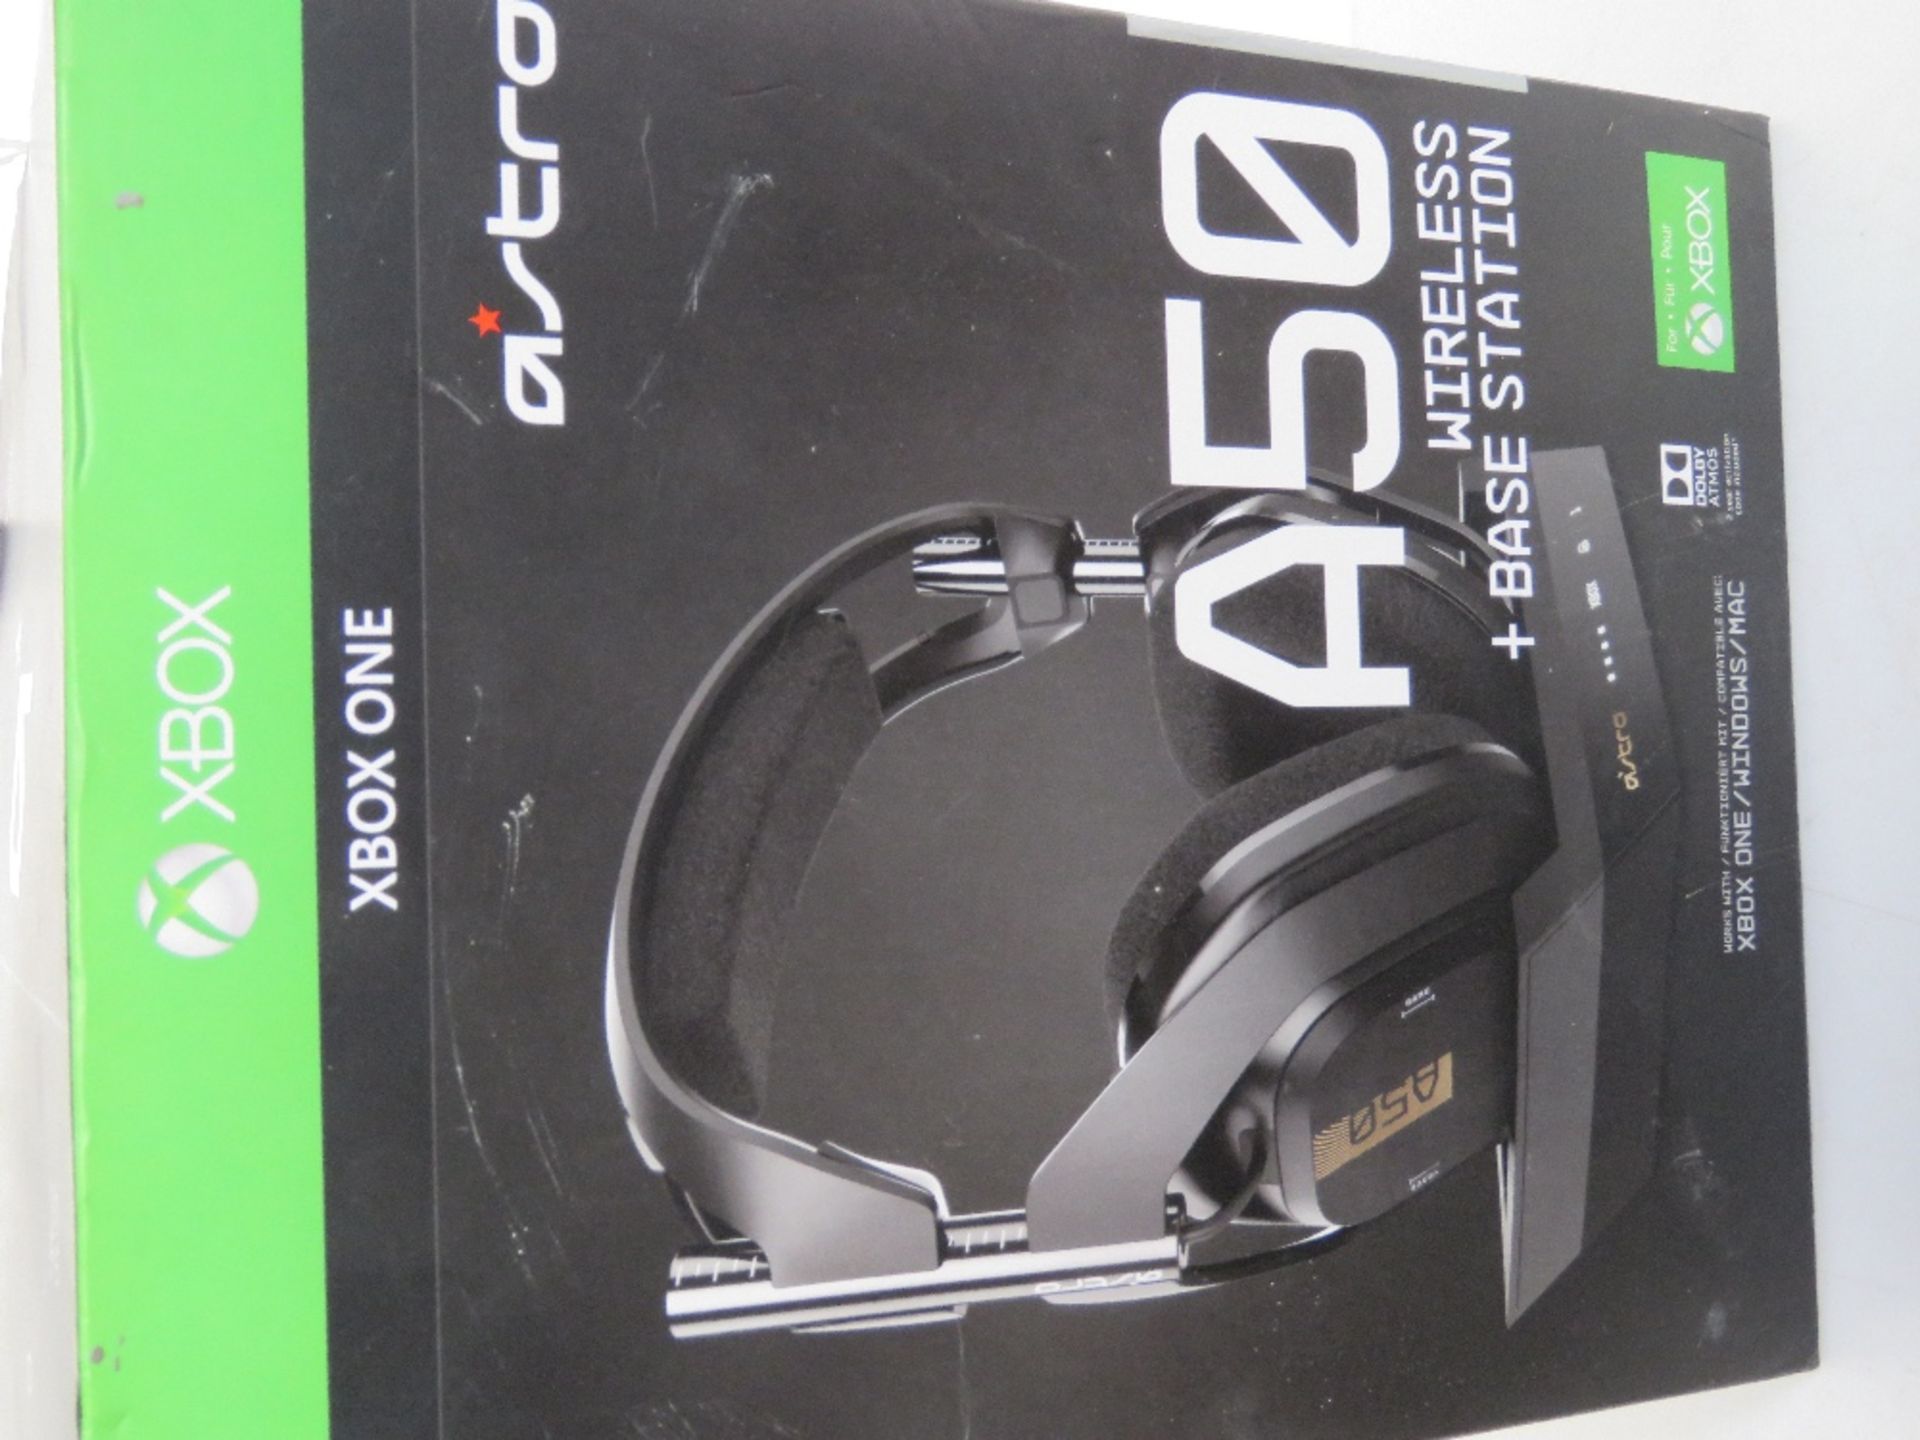 An Astro A50 wireless headset and base station, no pads, in original box, box outer a/f. - Image 4 of 4